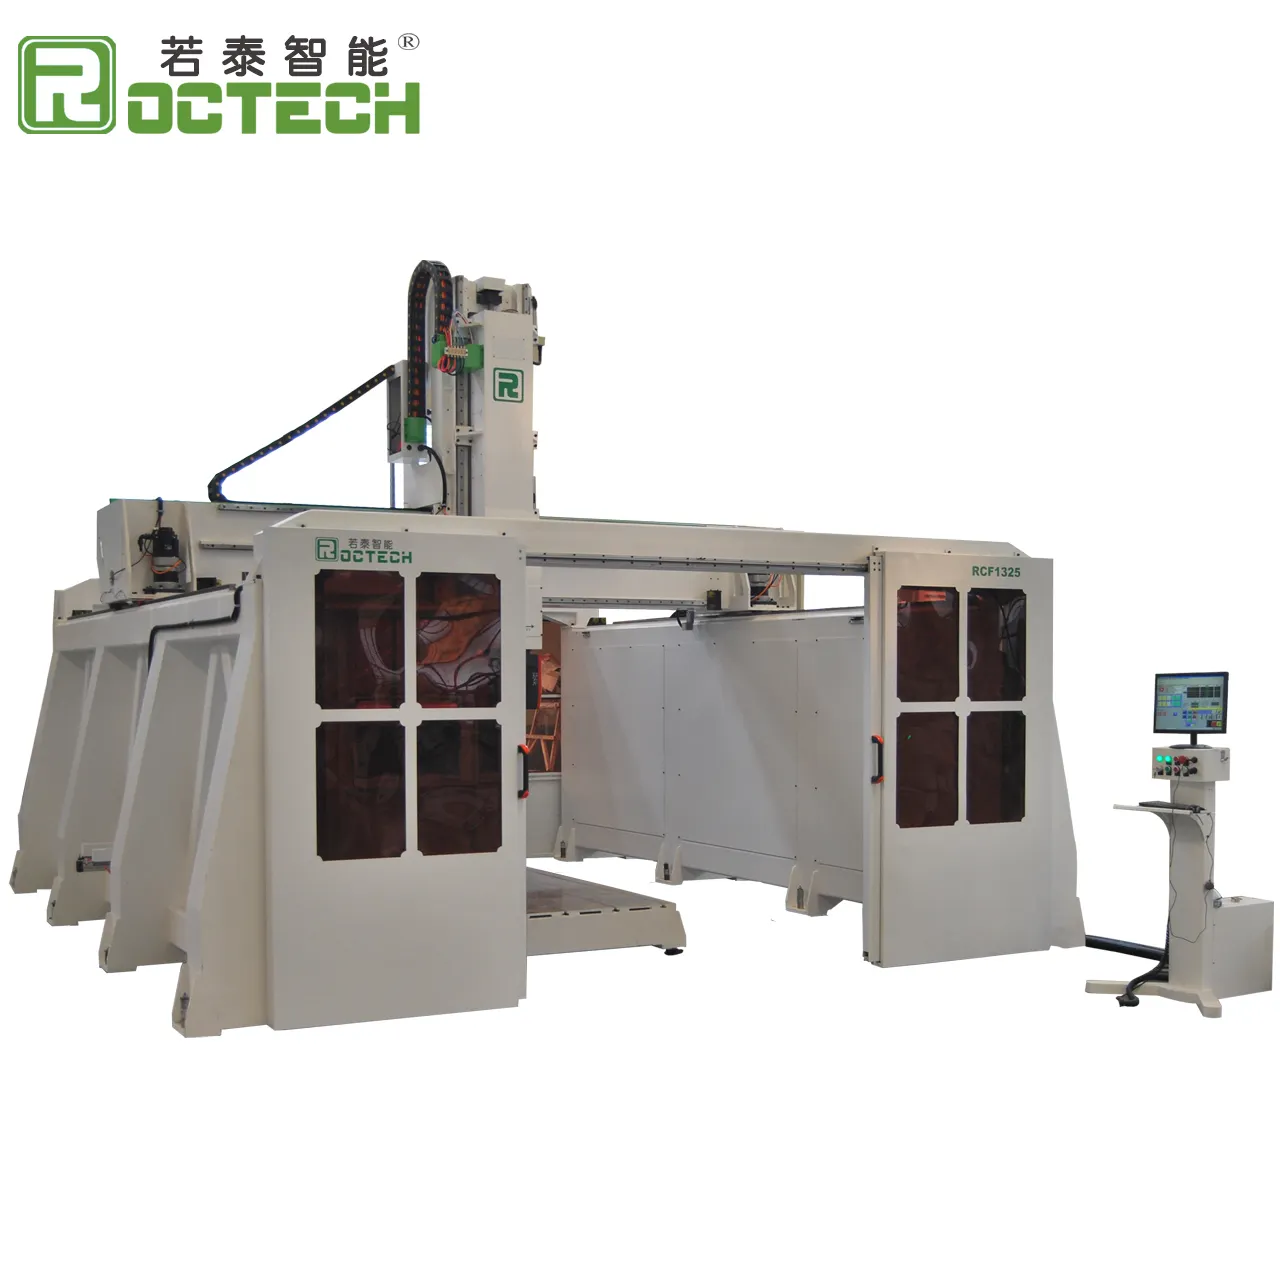 Large Mold Five-axis Milling Machine for Cruise Ship Model Making 5 axis CNC Milling Machine 5 axis CNC Router